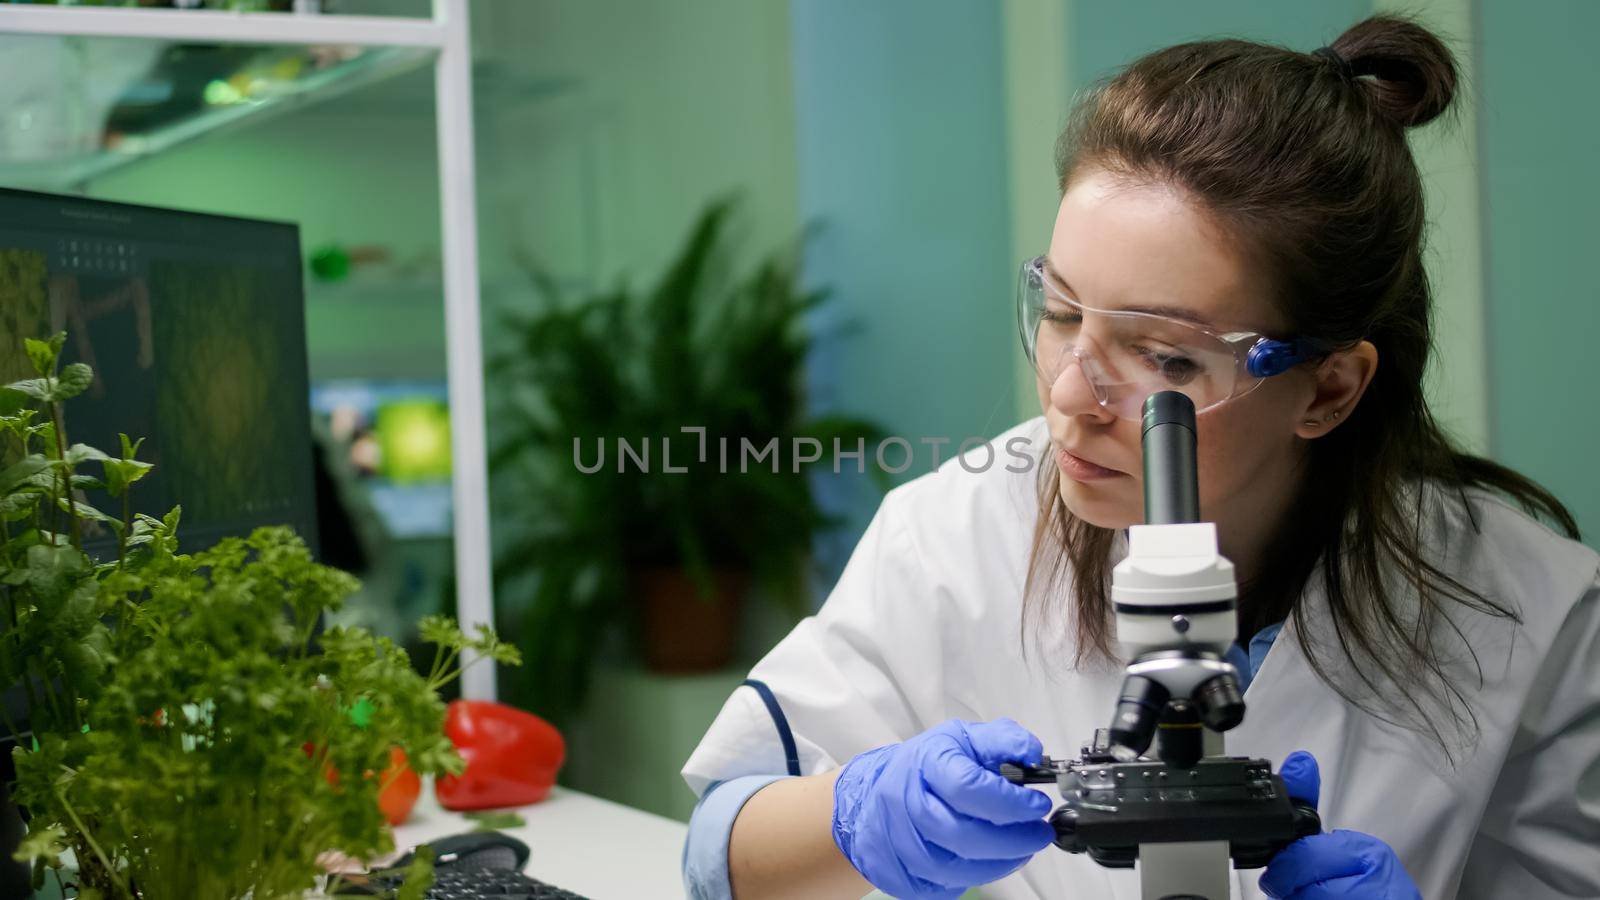 Biologist scientist looking at green leaf sample under microscope researching genetic mutation. Chemist specialist analyzing organic gmo plants while working in microbiology food laboratory